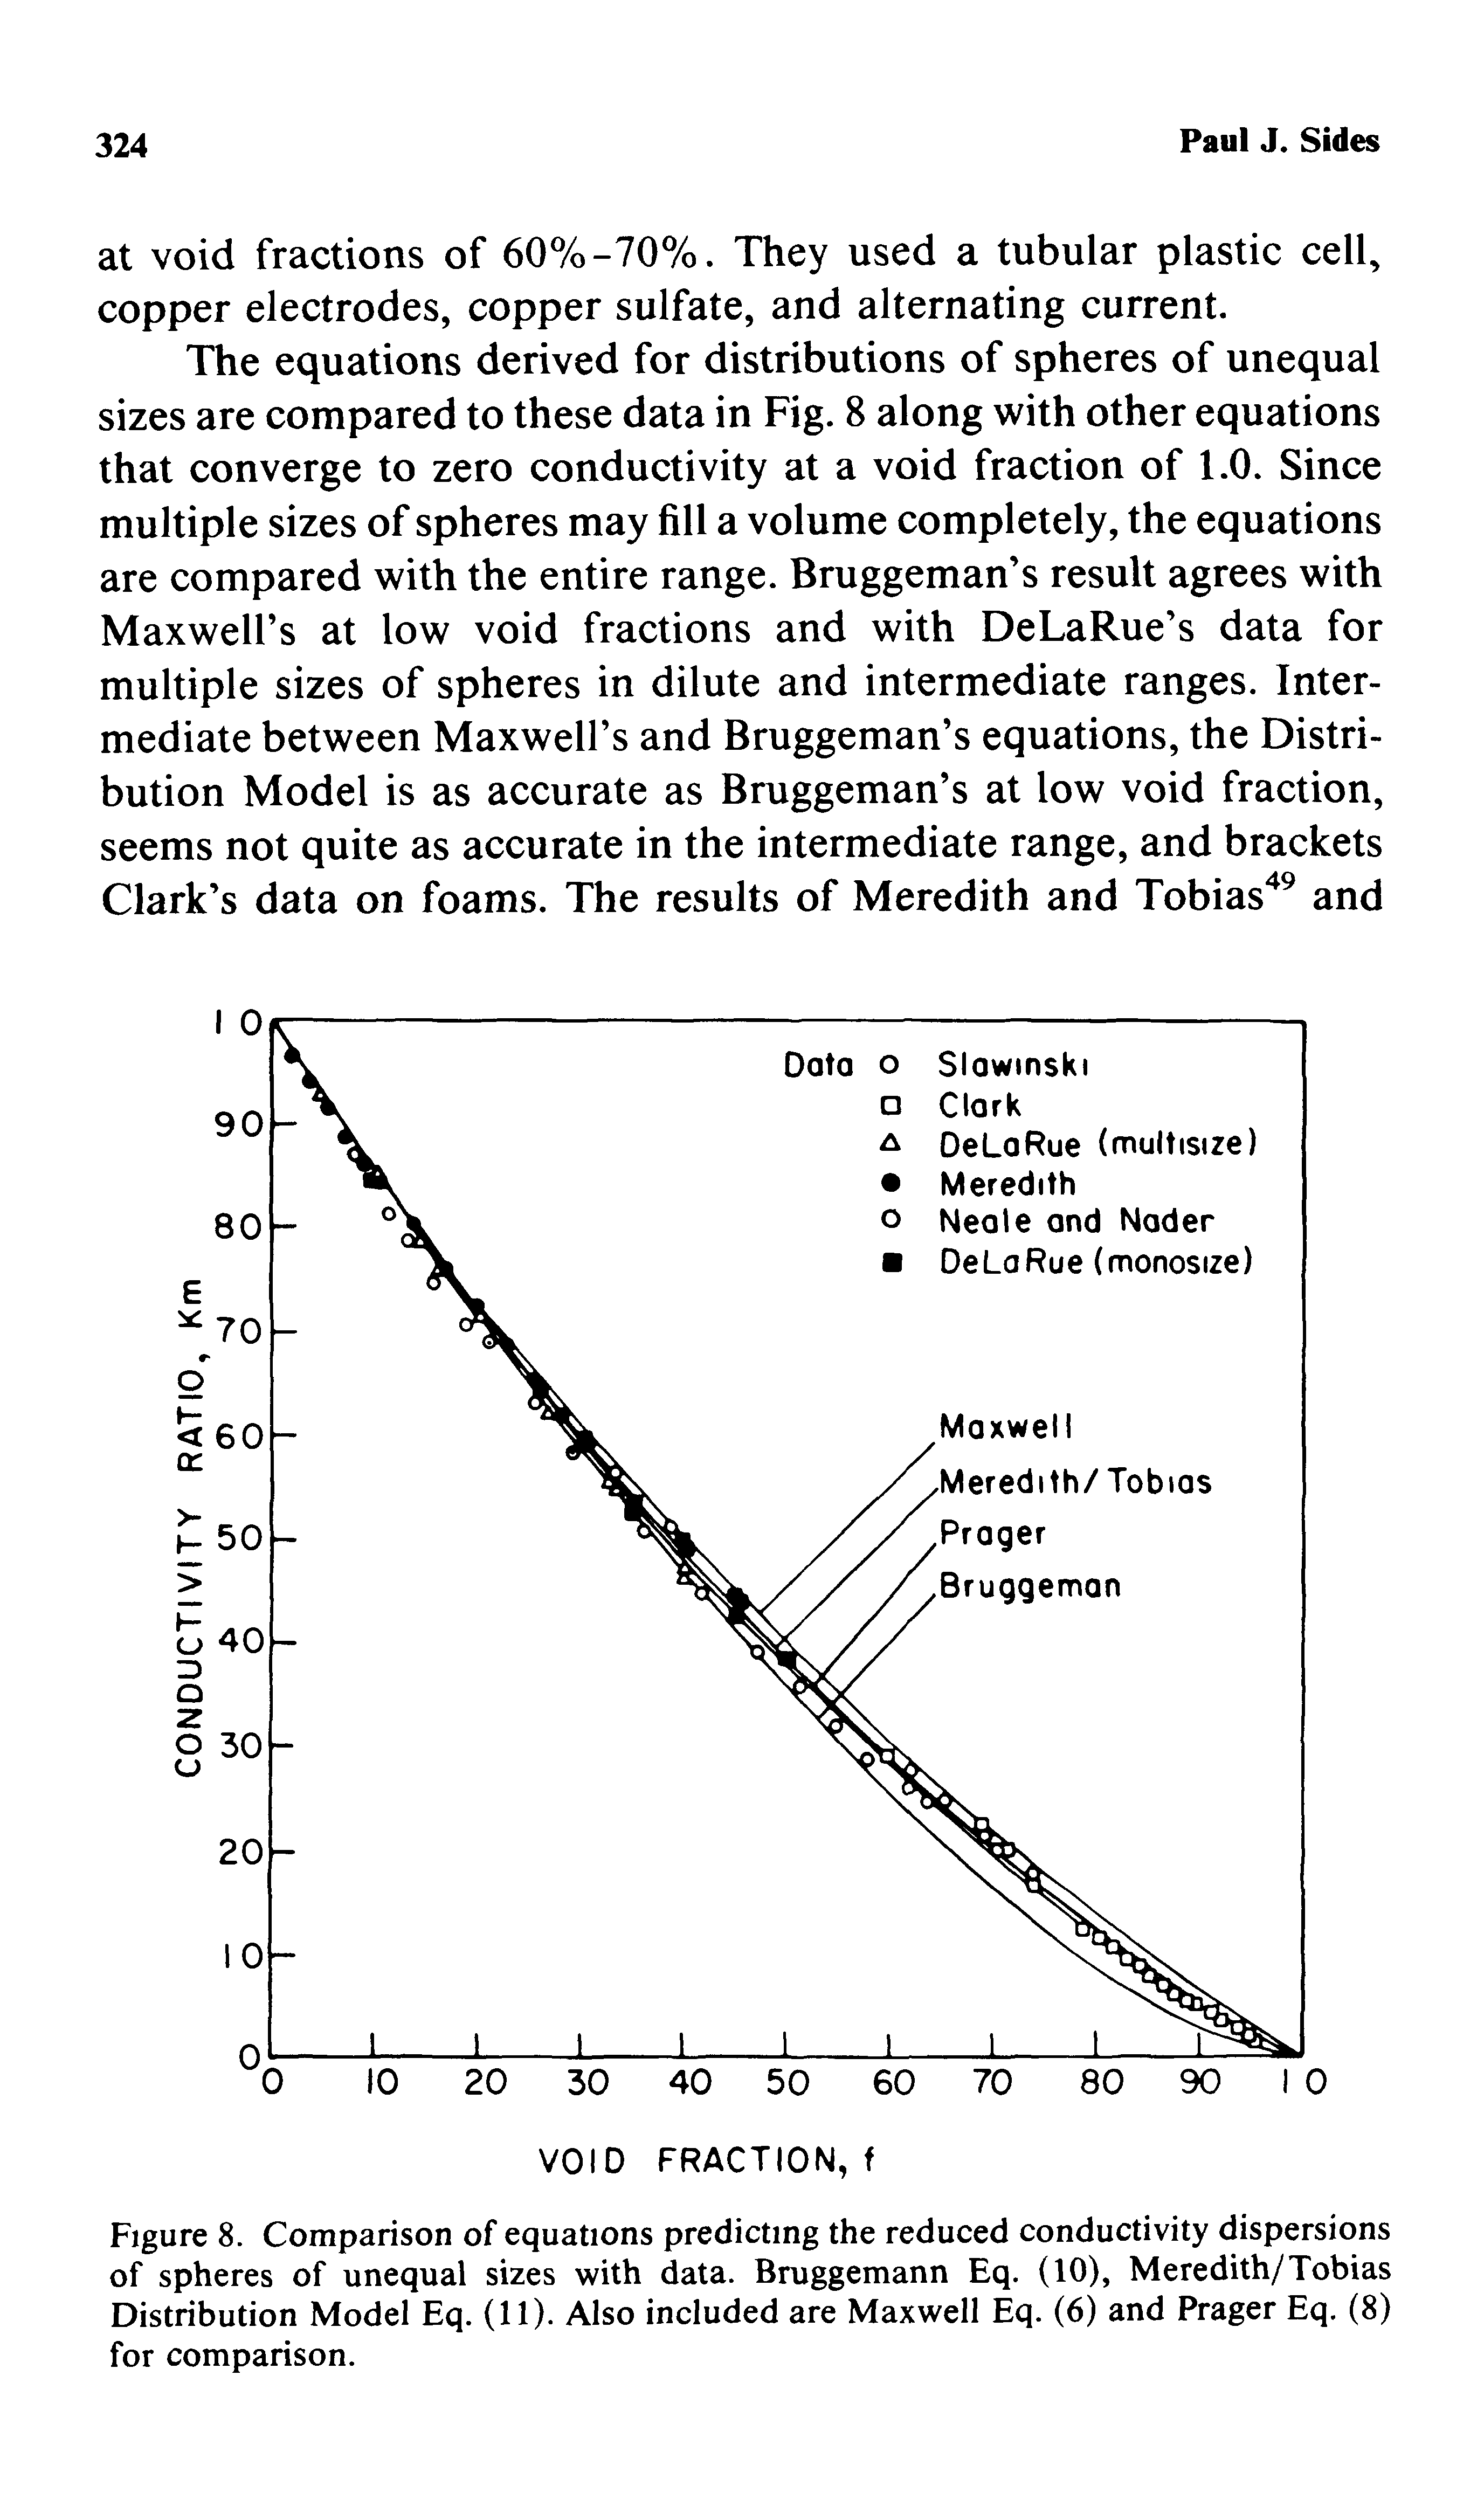 Figure 8. Comparison of equations predicting the reduced conductivity dispersions of spheres of unequal sizes with data. Bruggemann Eq. (10), Meredith/Tobias Distribution Model Eq. (11). Also included are Maxwell Eq. (6) and Prager Eq. (8) for comparison.